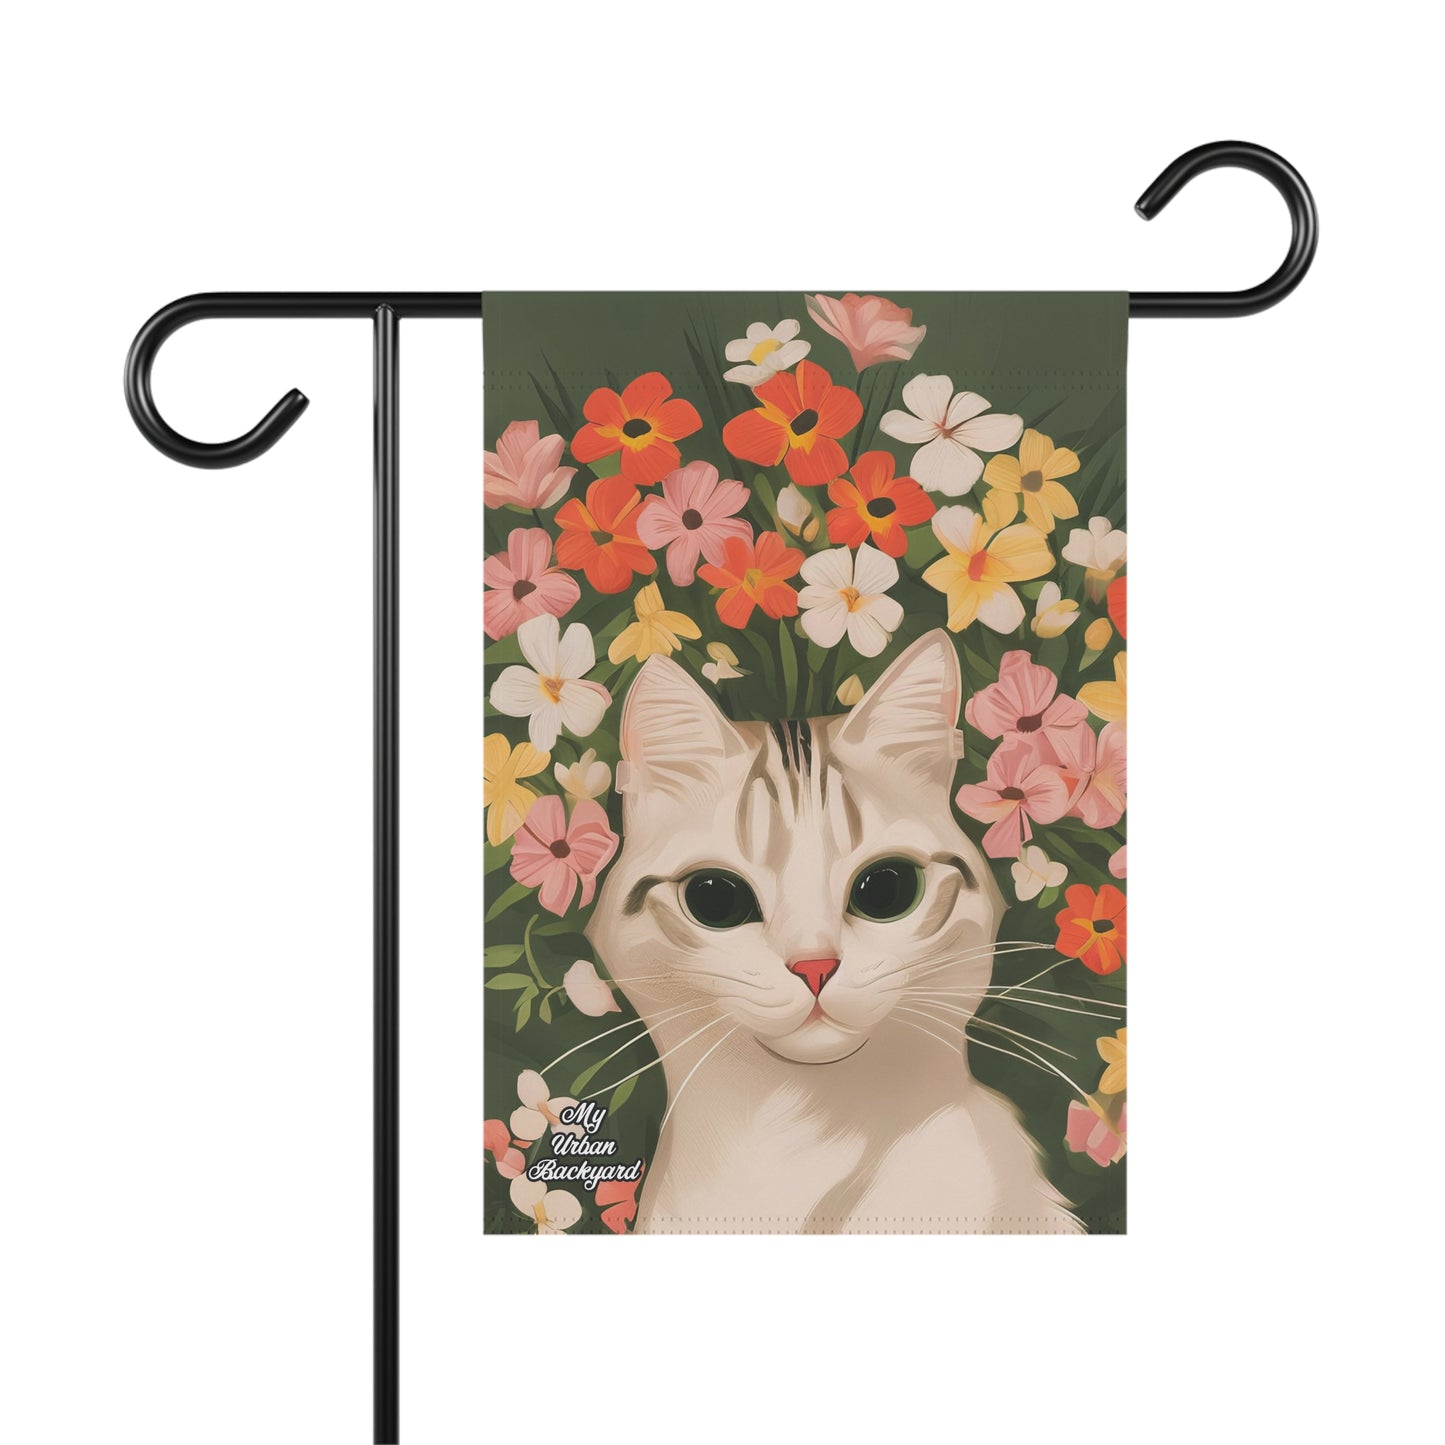 White Cat and Flowers, Garden Flag for Yard, Patio, Porch, or Work, 12"x18" - Flag only